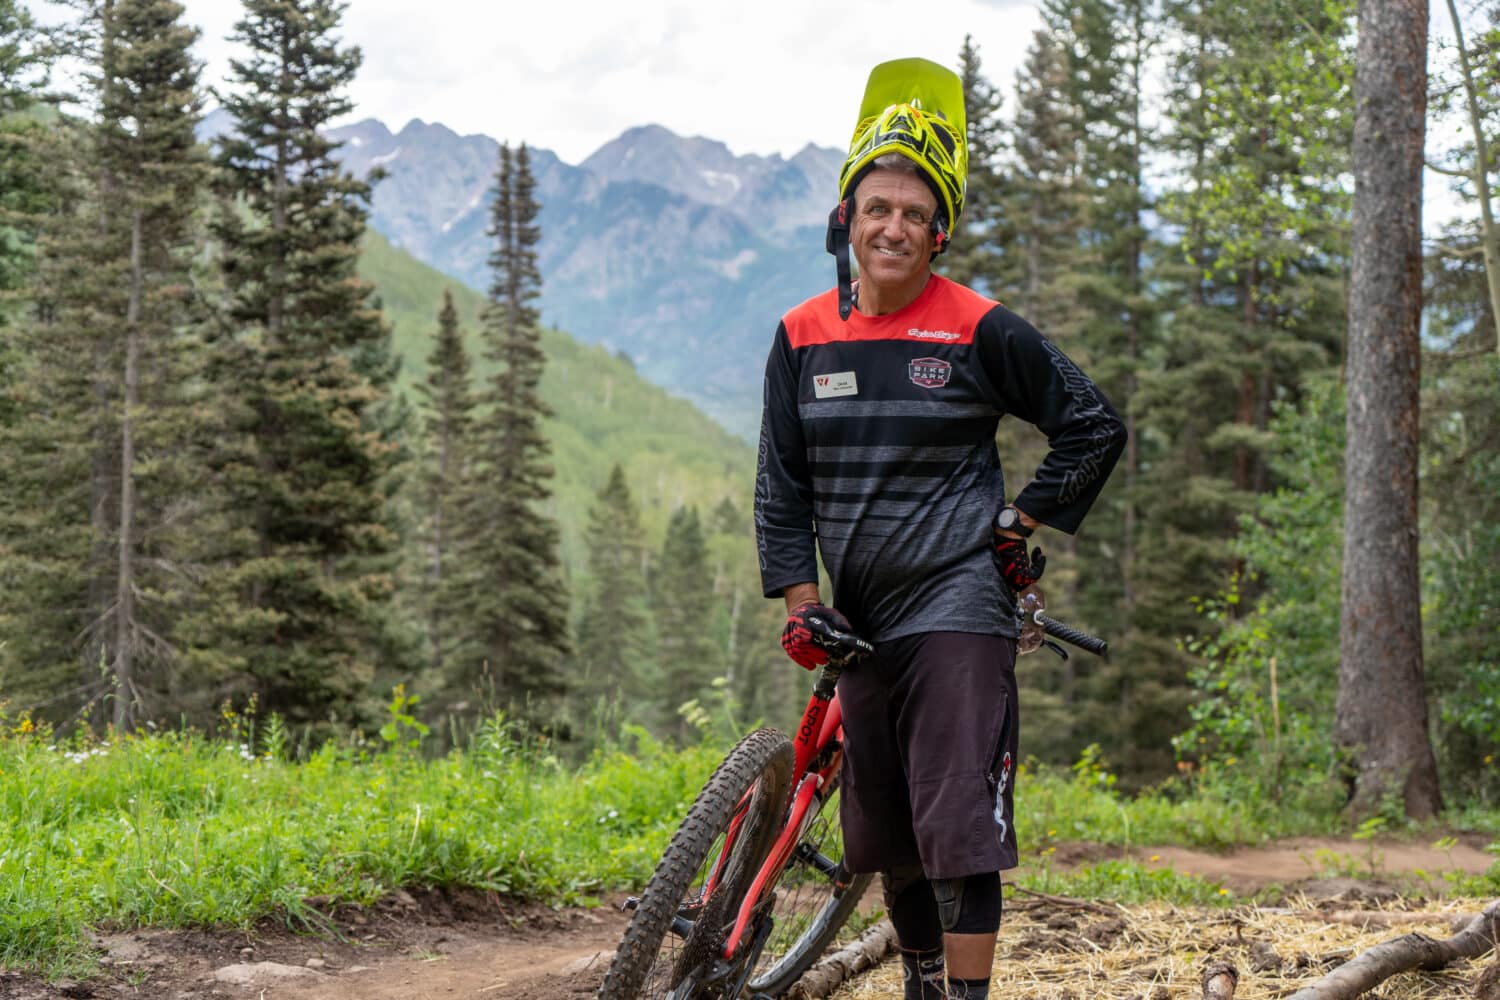 Read more: Meet the Double Amputee Who Crushes the Purg Bike Park